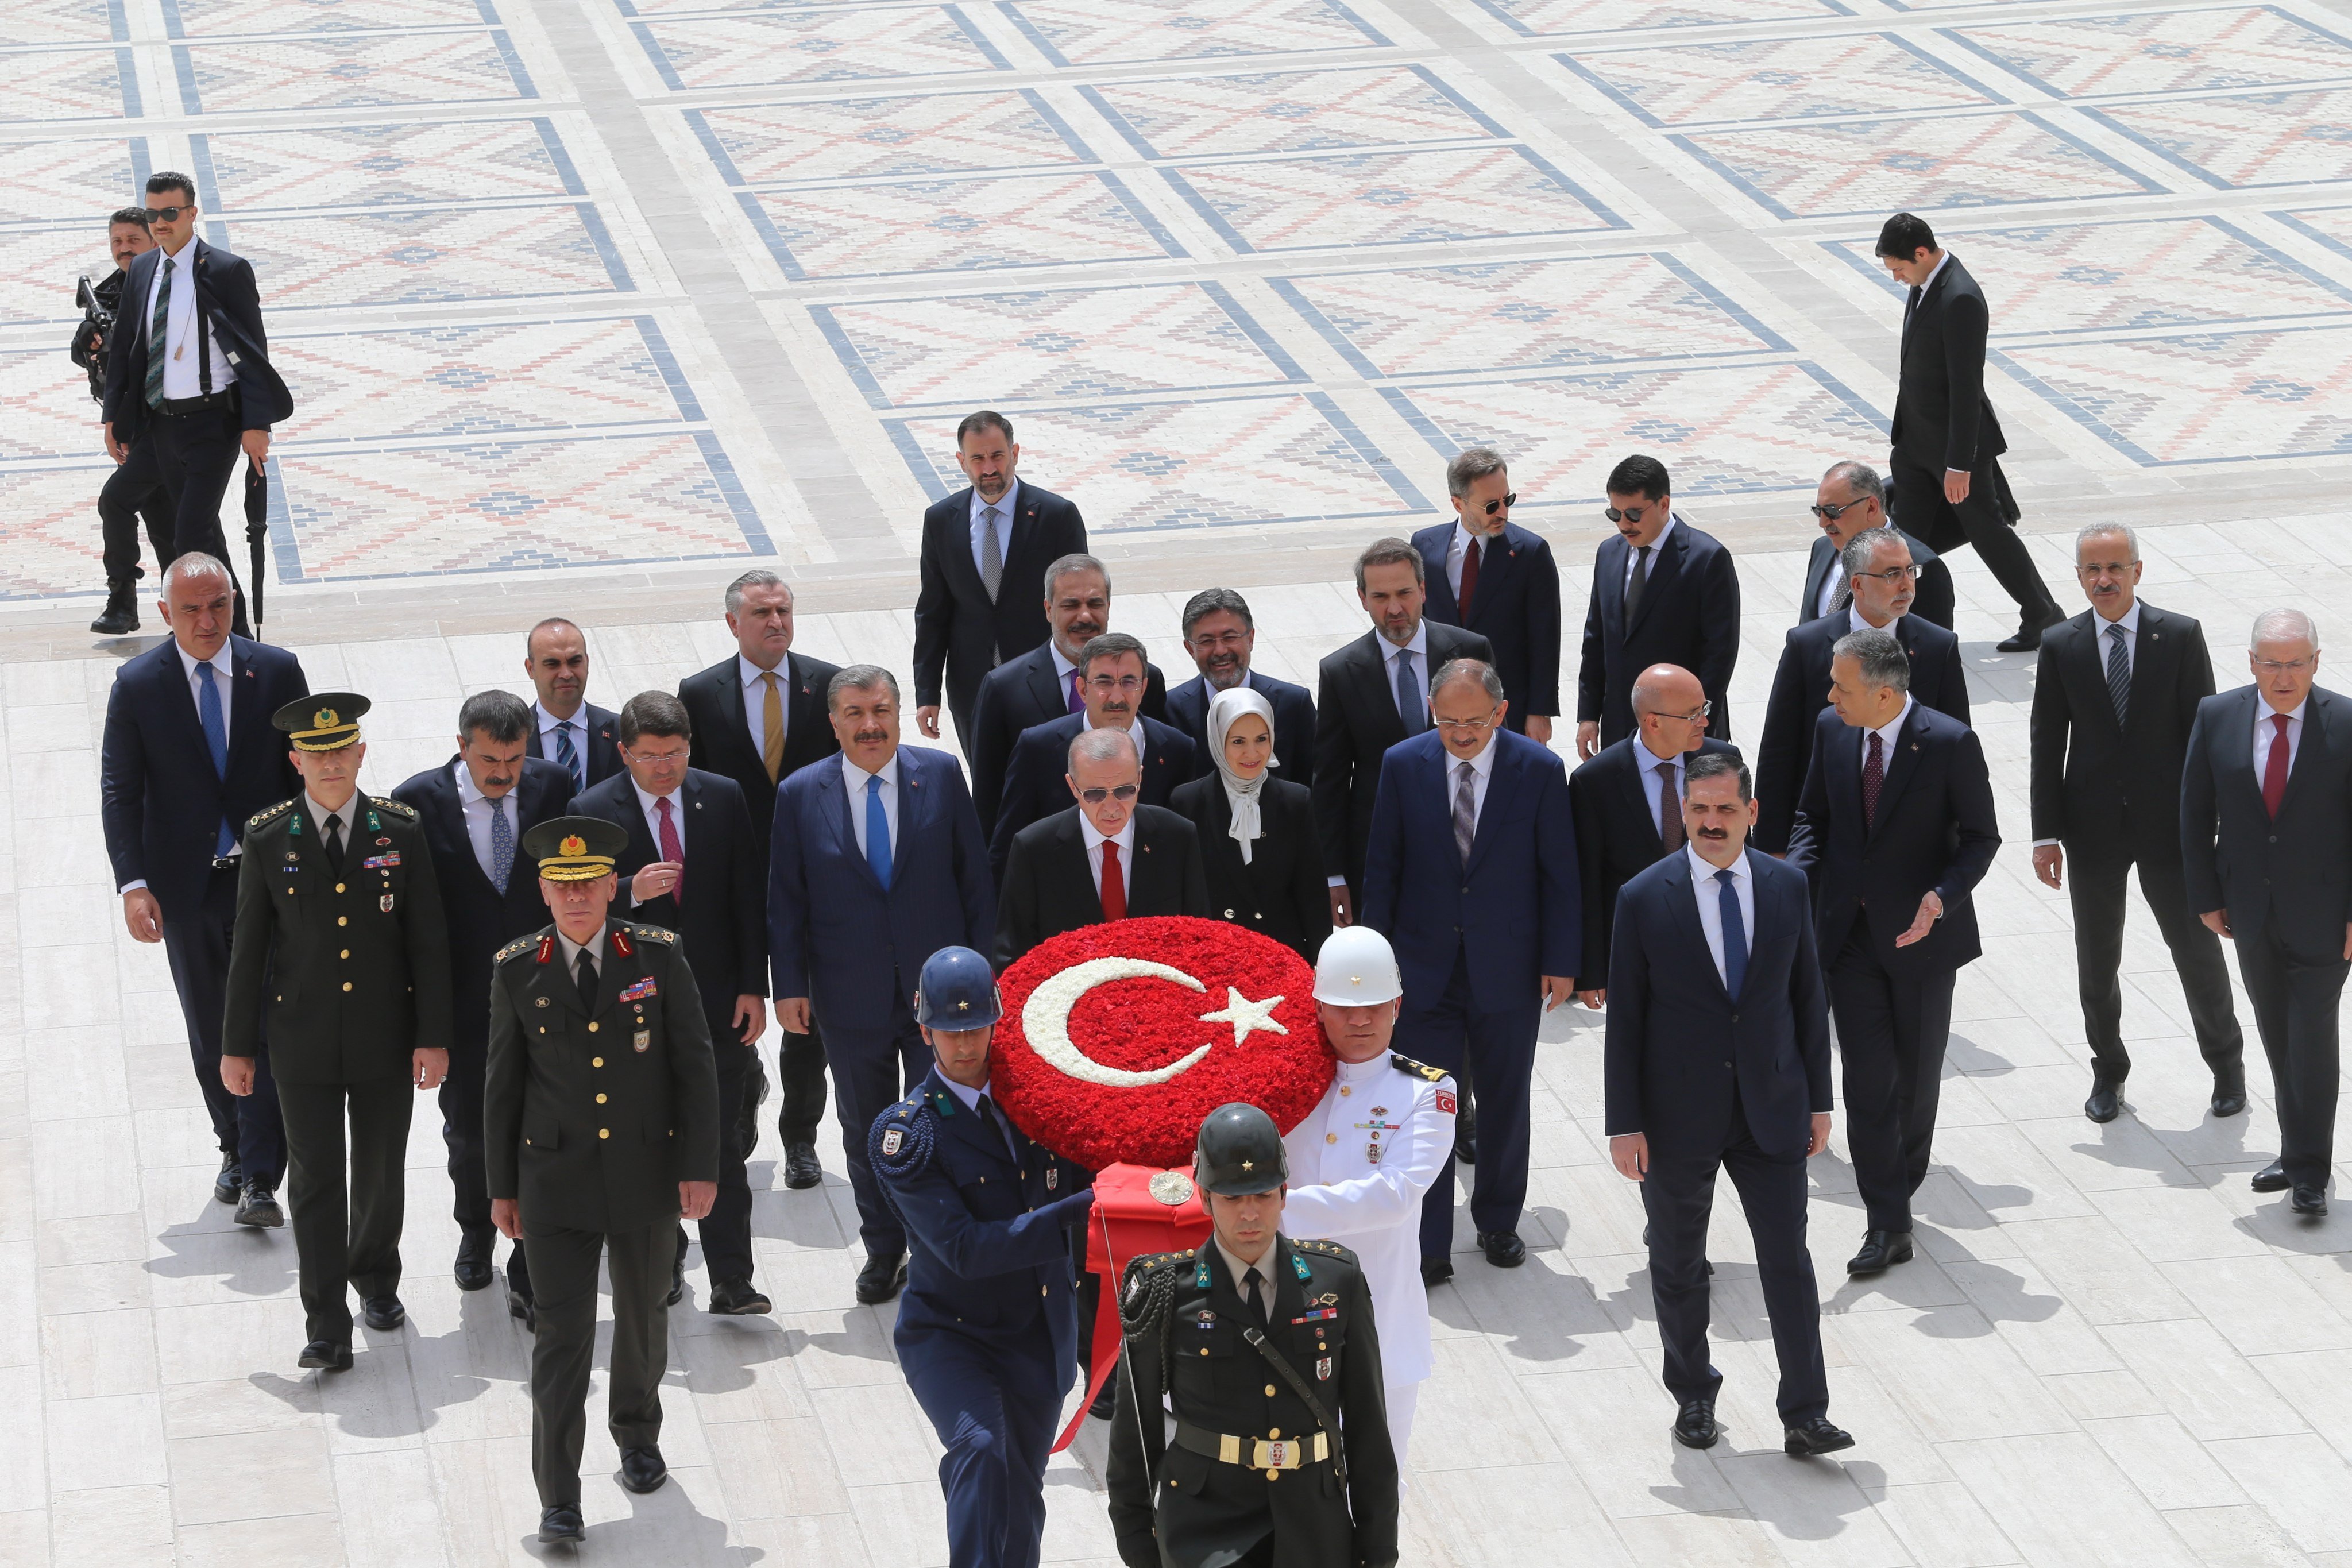 Turkish President Recep Tayyip Erdogan (front-centre) and new cabinet members. Erdogan, who was re-elected to a third term in office last month, already signalled a shift on Saturday when he unveiled a new cabinet with Mehmet Simsek, a former Merrill Lynch economist, as finance minister. Photo: EPA-EFE